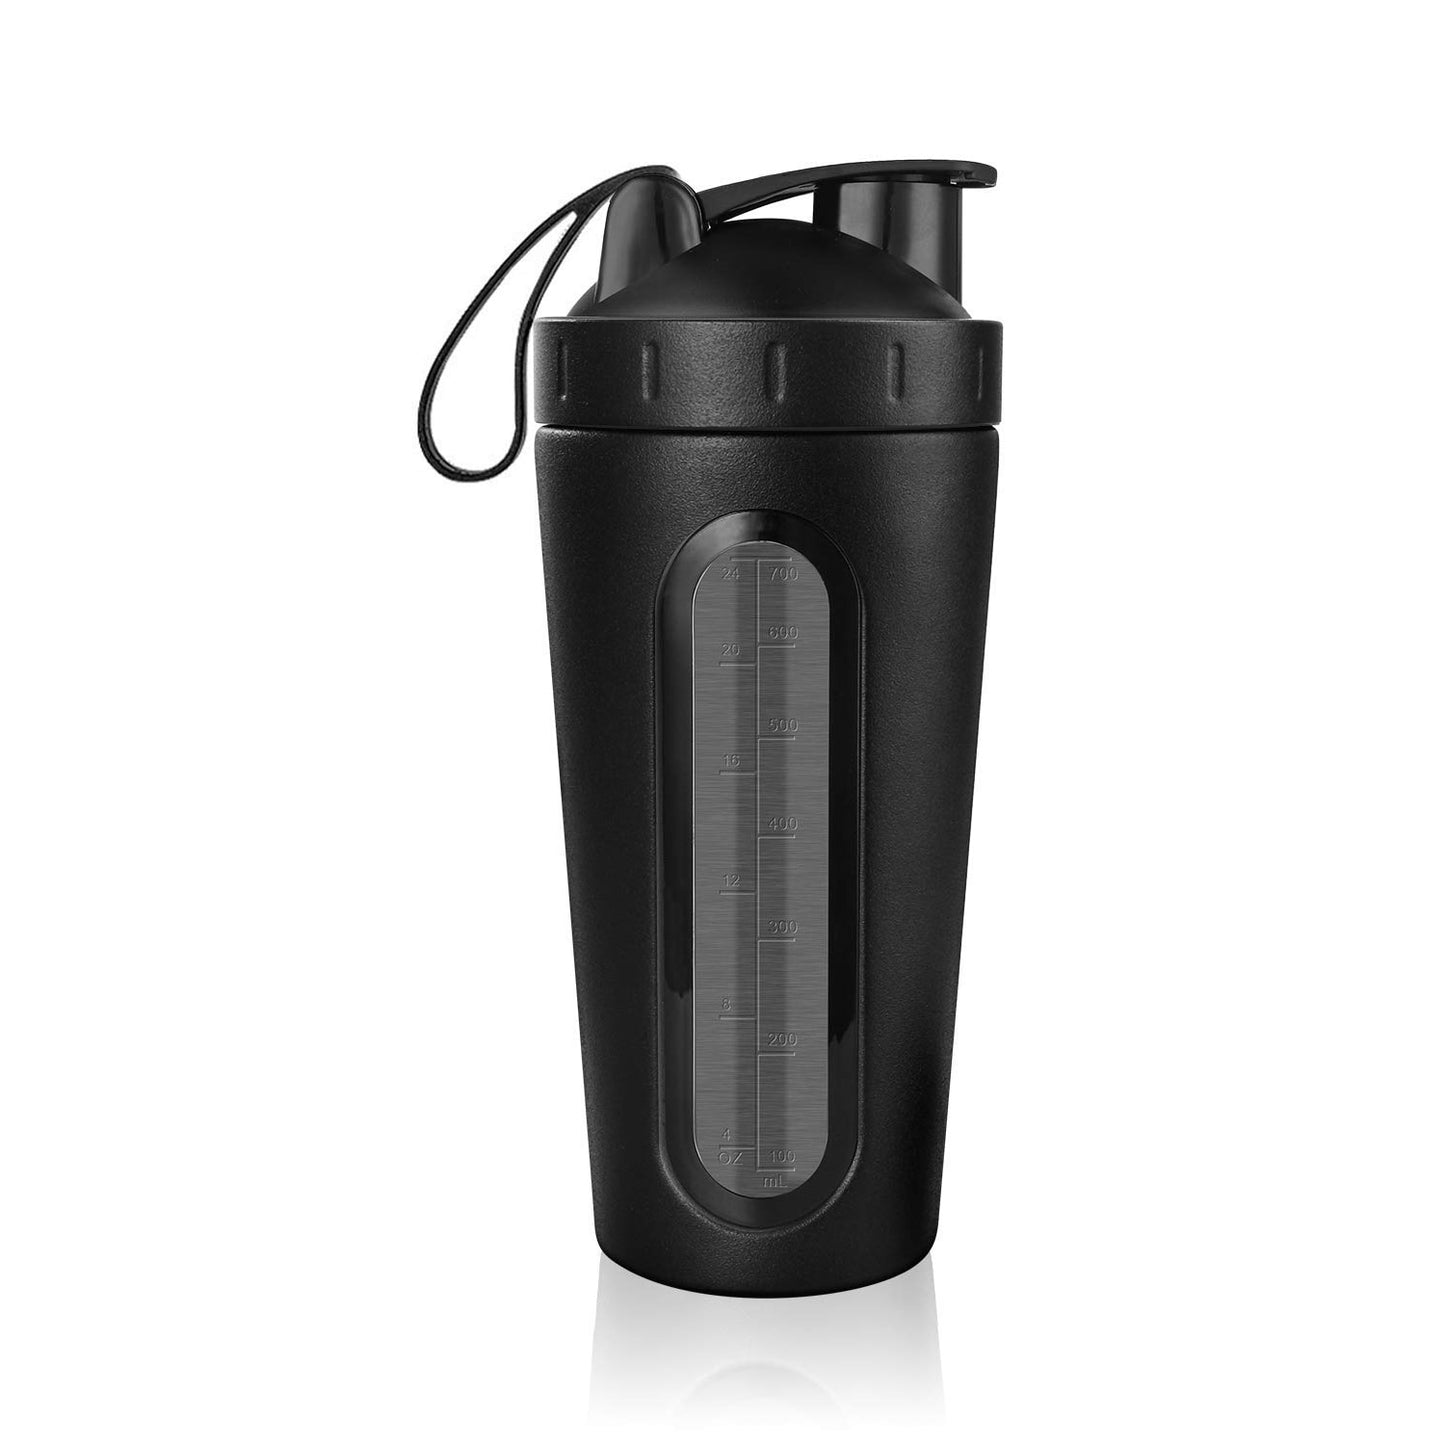 Stainless Steel Protein Shaker - 5 COLOURS